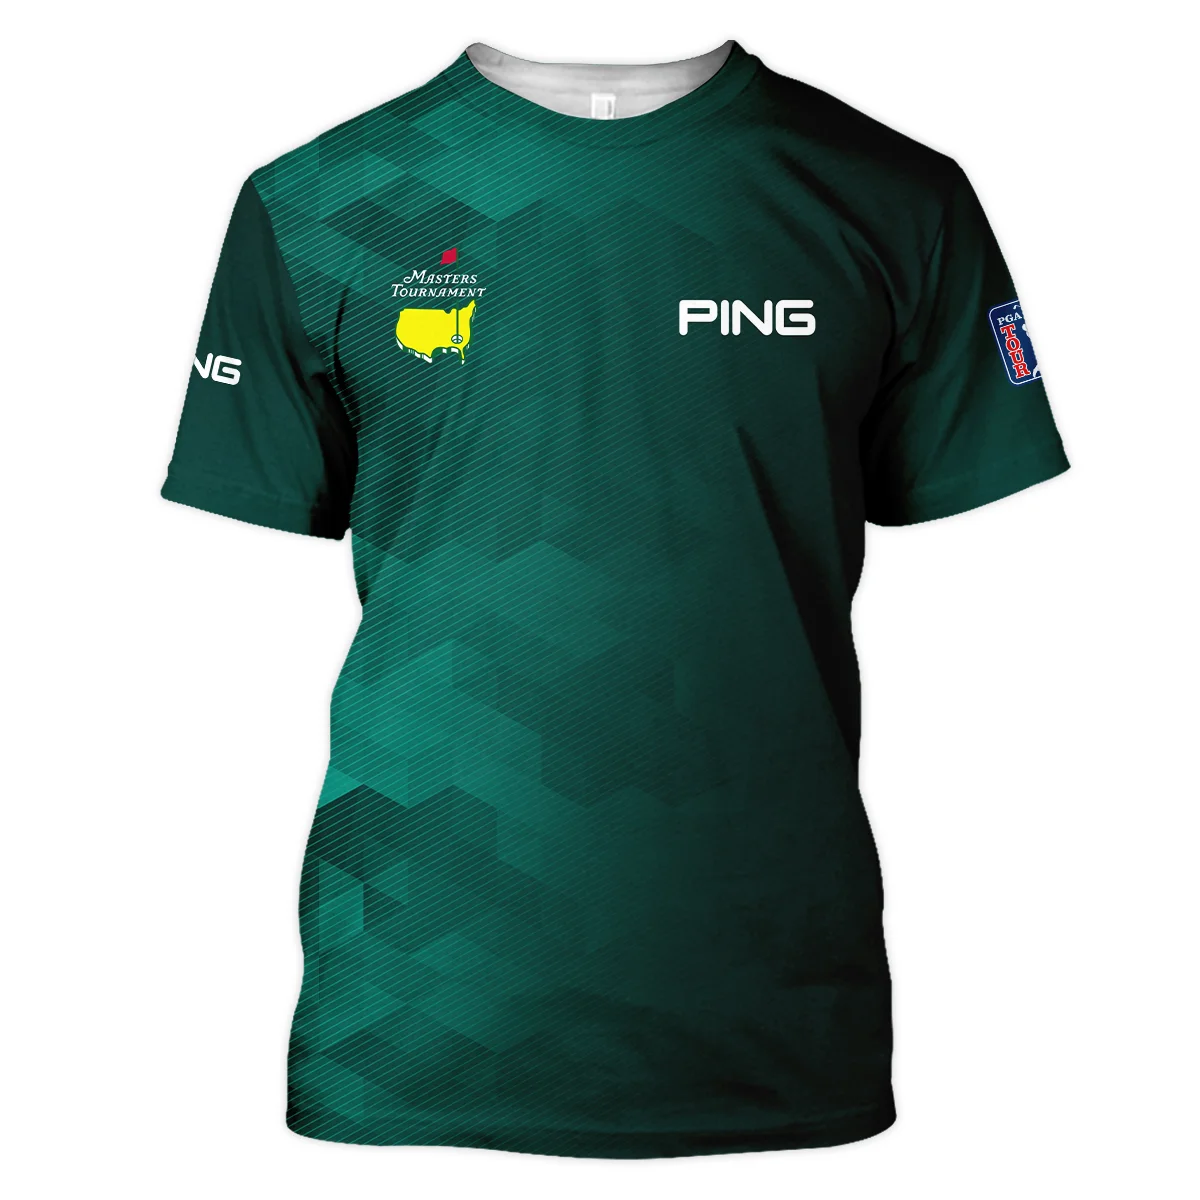 Ping Golf Sport Dark Green Gradient Abstract Background Masters Tournament Unisex T-Shirt Style Classic T-Shirt